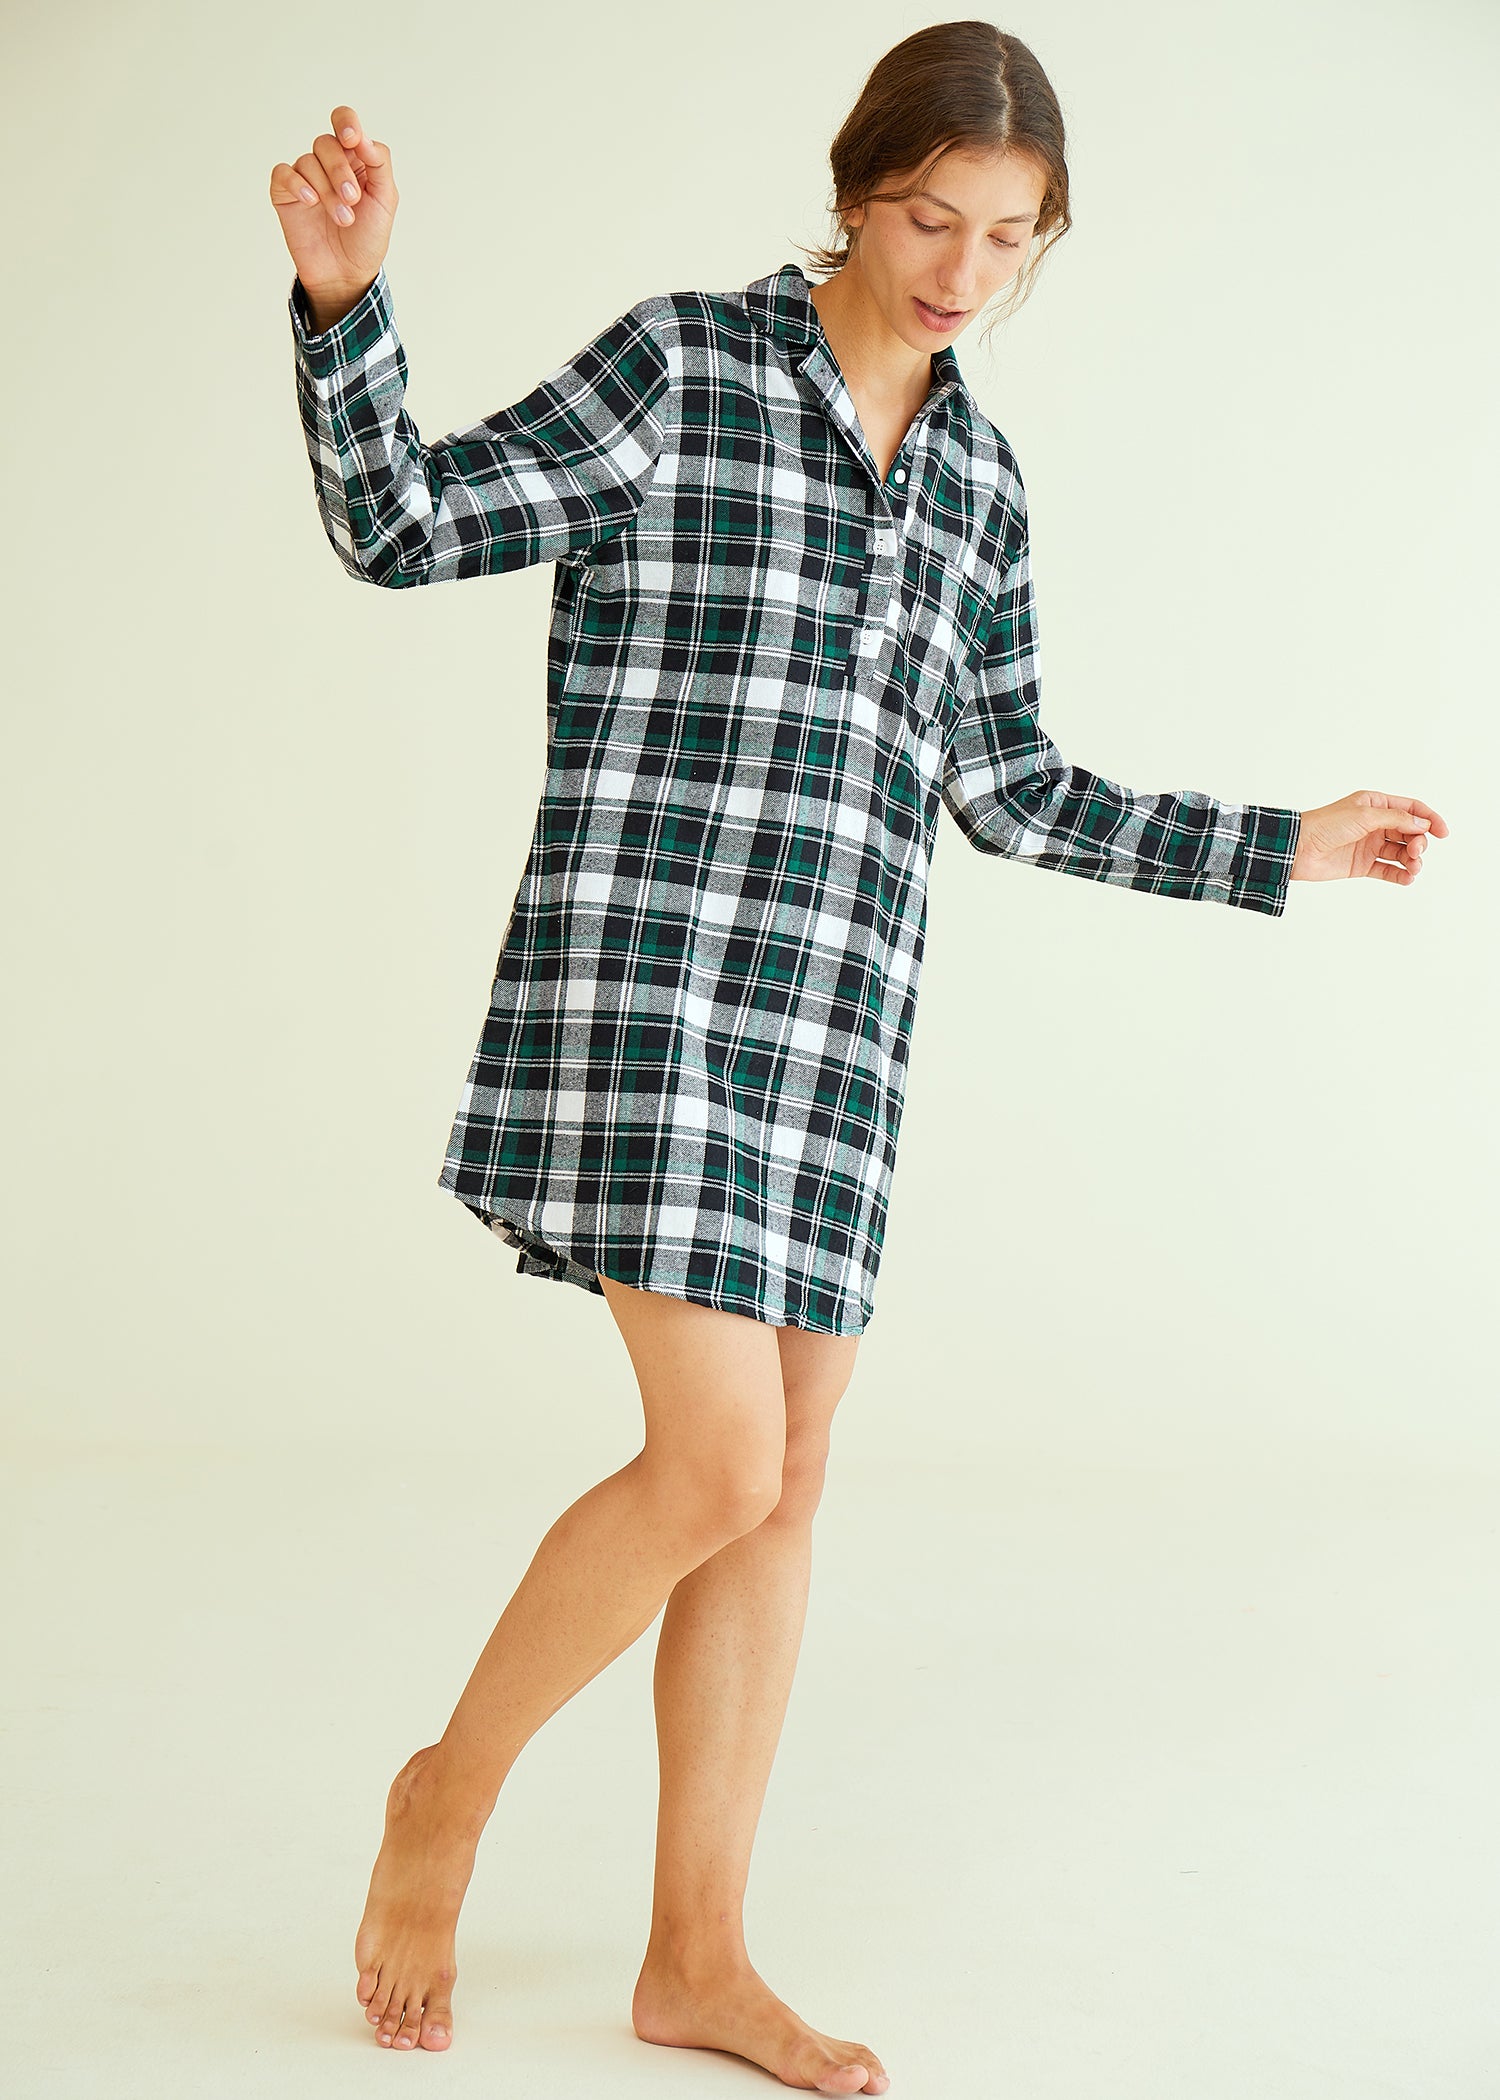 Long Flannel Nightgown for Women Long Sleeve Plus Size S-3X Medium Black